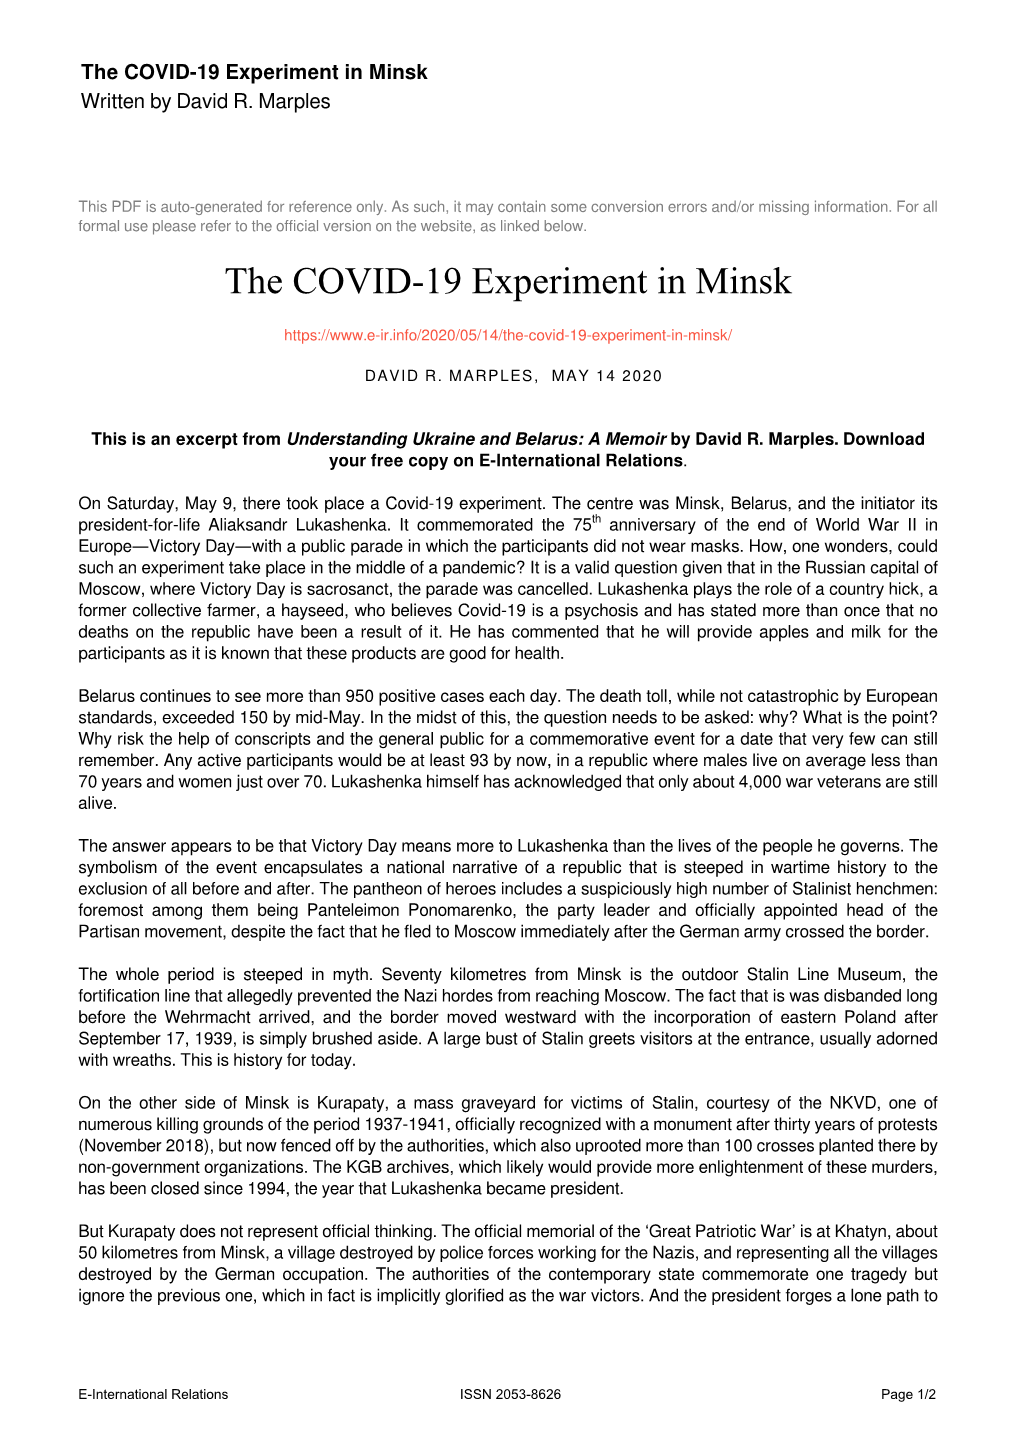 The COVID-19 Experiment in Minsk Written by David R